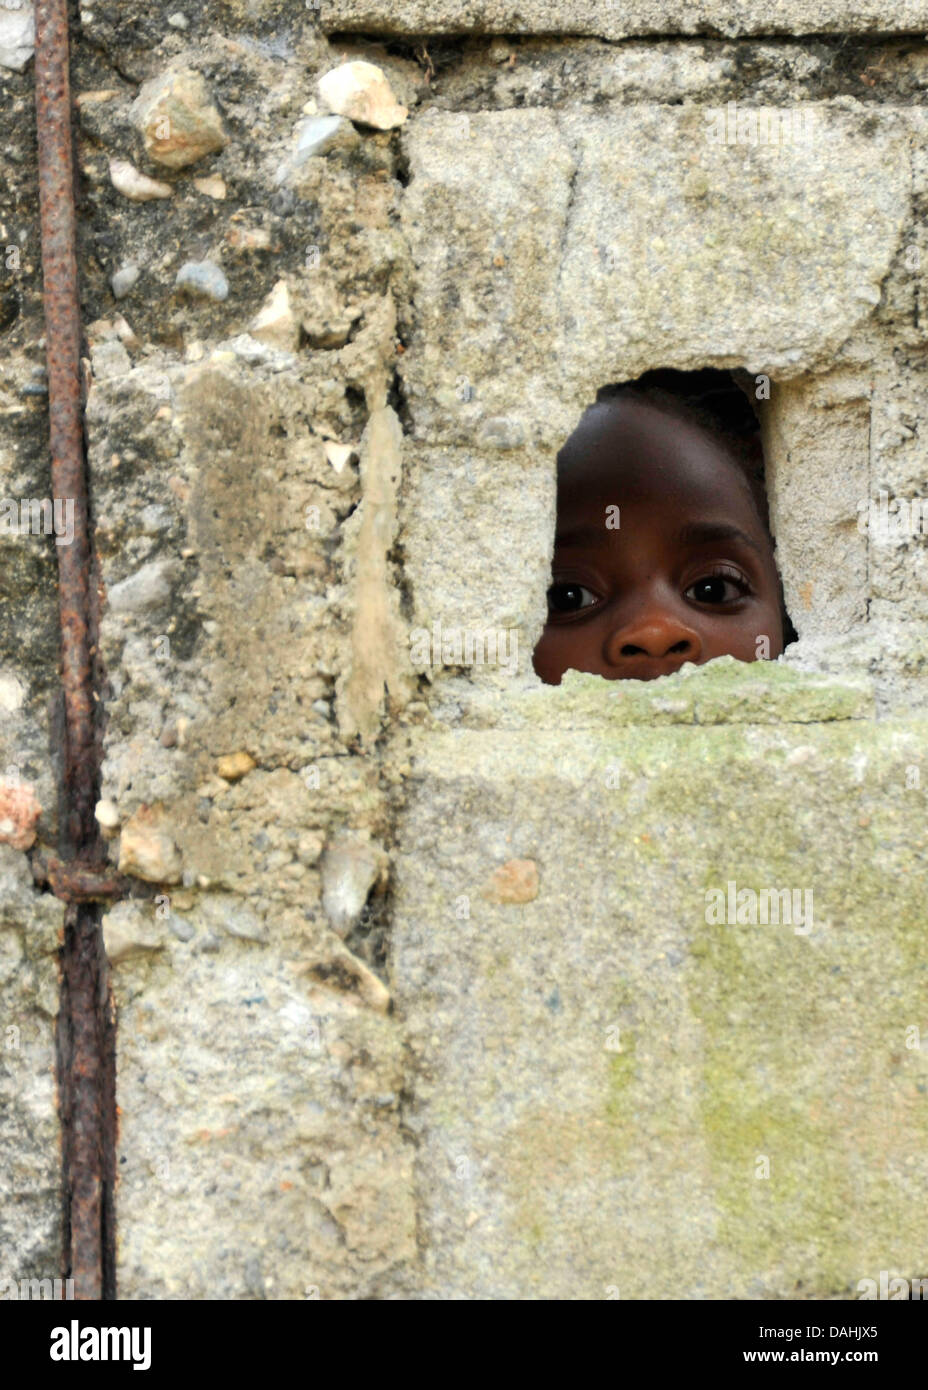 A little boy peaks through a hole in a wall at the Milot hospital where he is being treated for injuries from the 7.0 magnitude earthquake that killed 220,000 people February 2, 2010 in Cap-Haitien, Haiti. Stock Photo